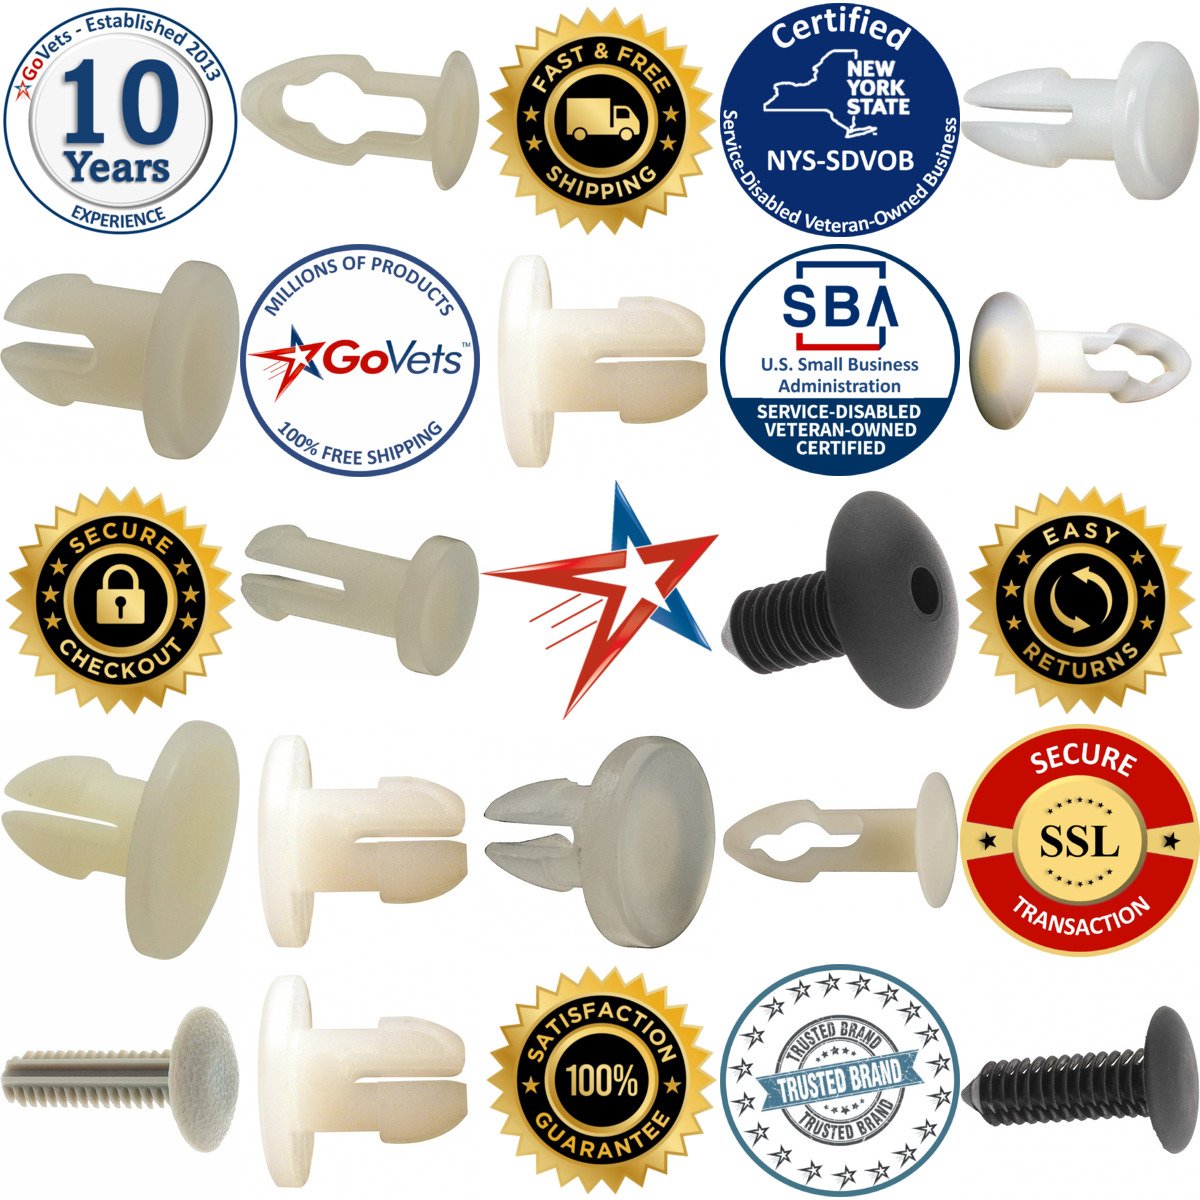 A selection of Panel Rivets products on GoVets